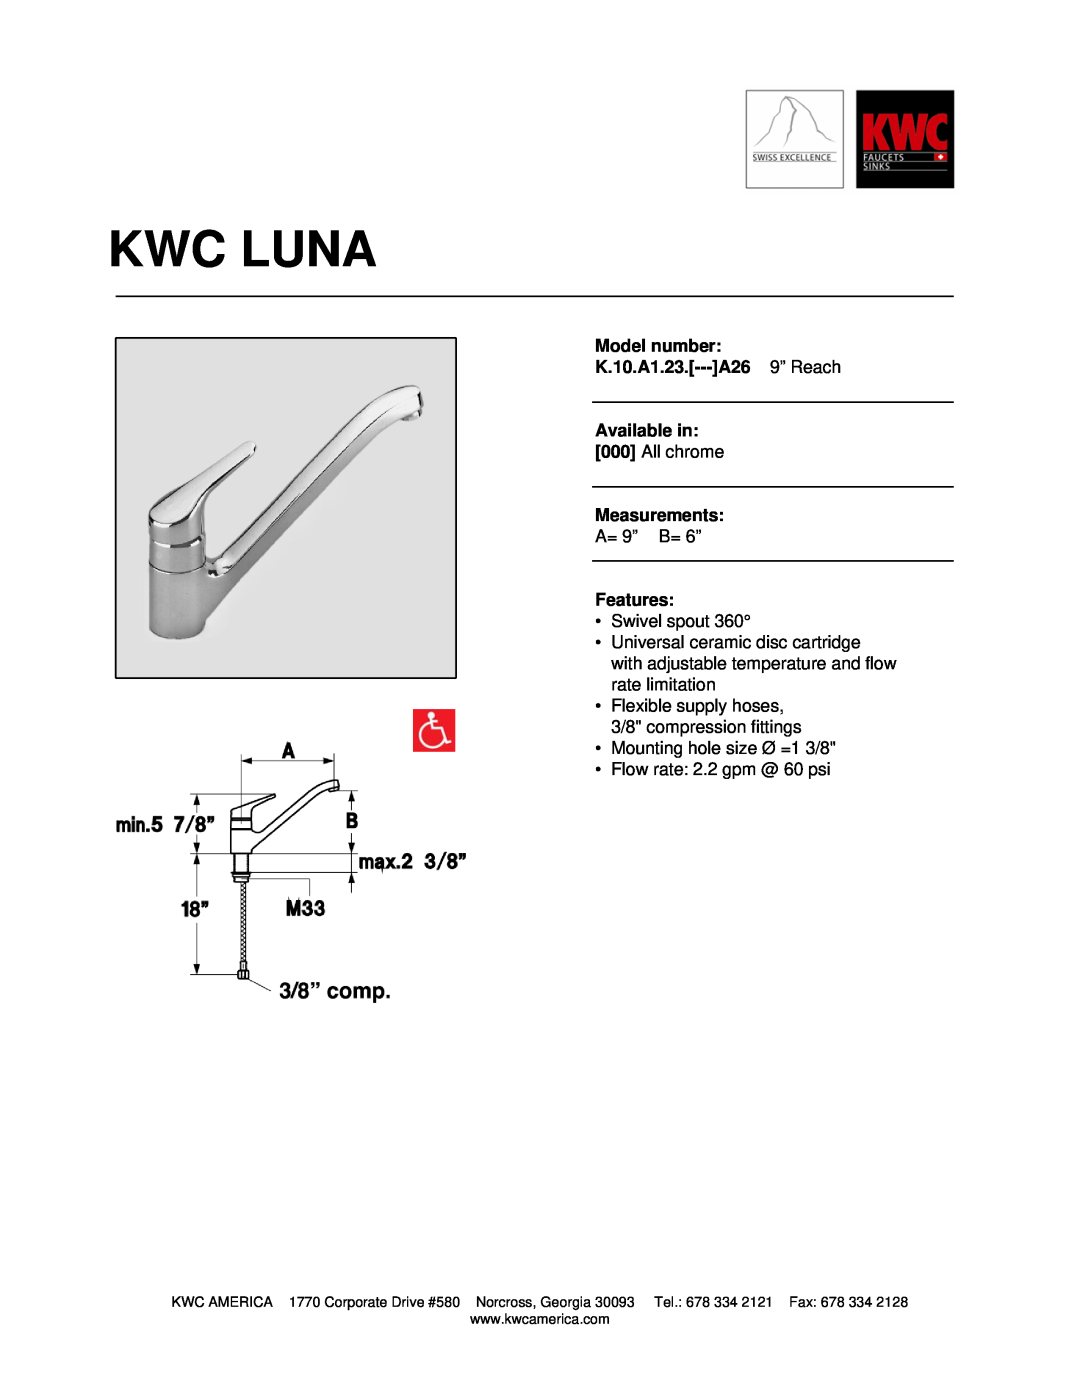 KWC manual Kwc Luna, Model number K.10.A1.23.---A26 9” Reach, Available in, Measurements, Features 